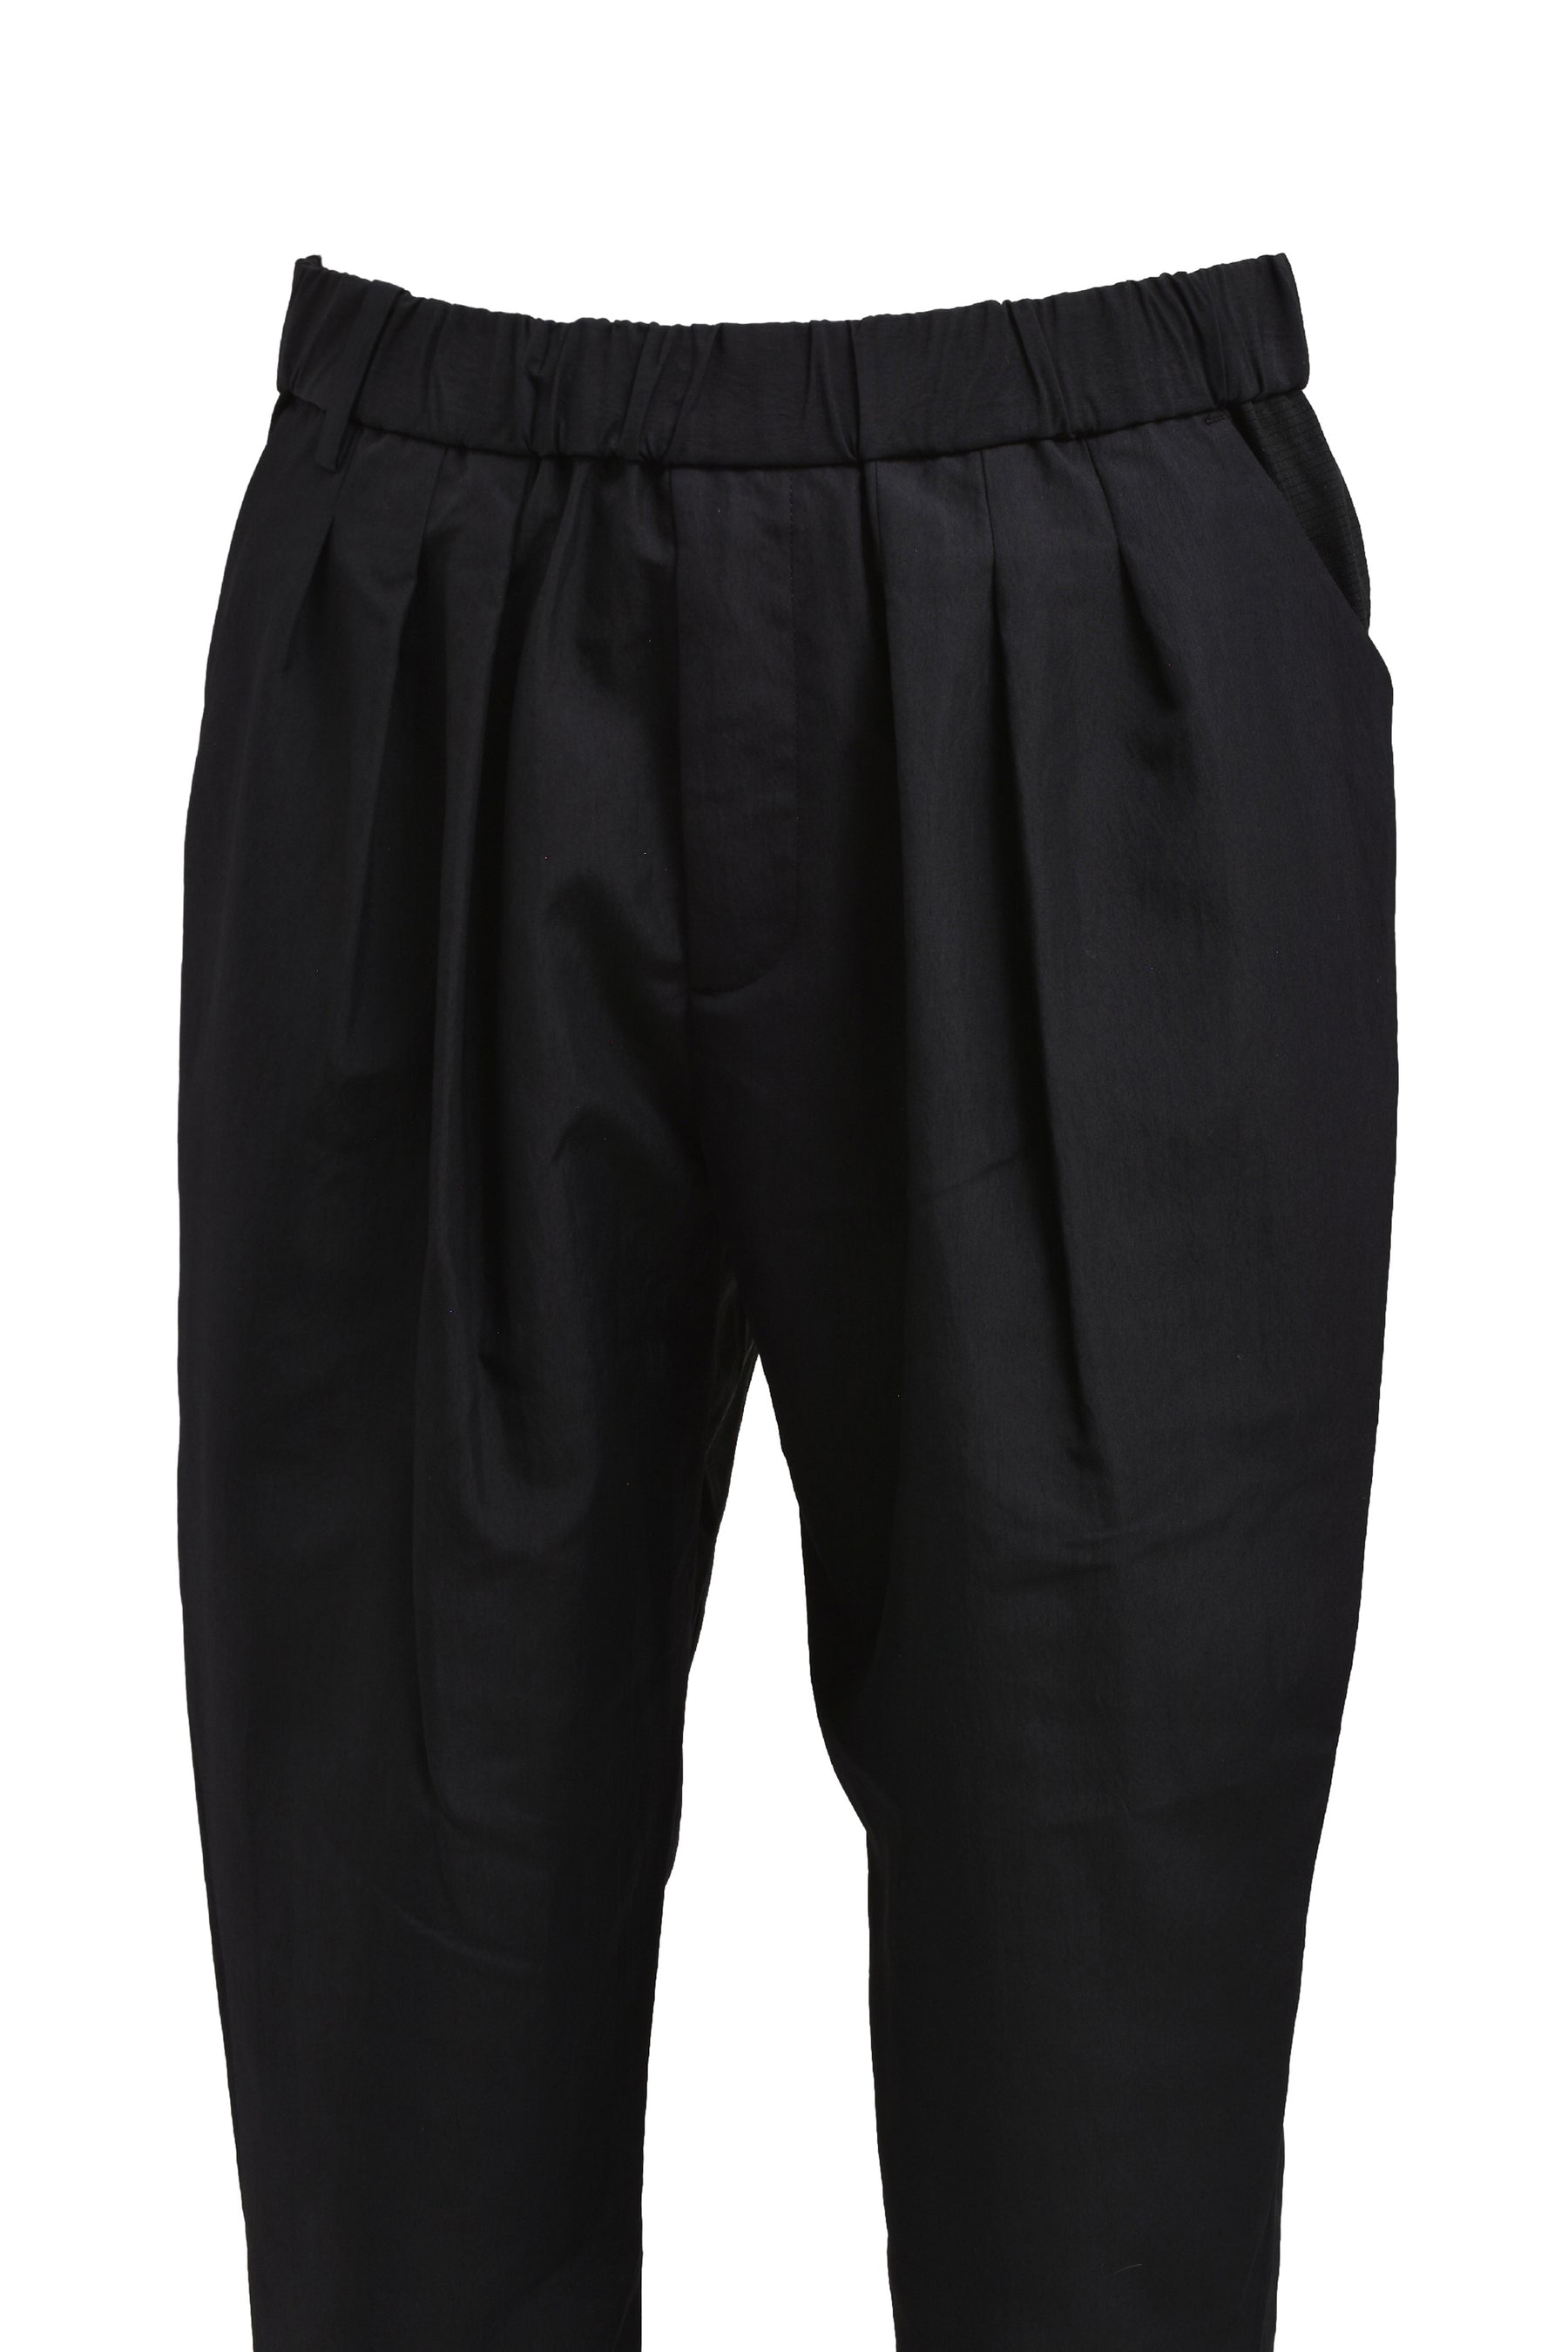 POLYESTER TAFFETA TAPERED EASY PANTS / BLK